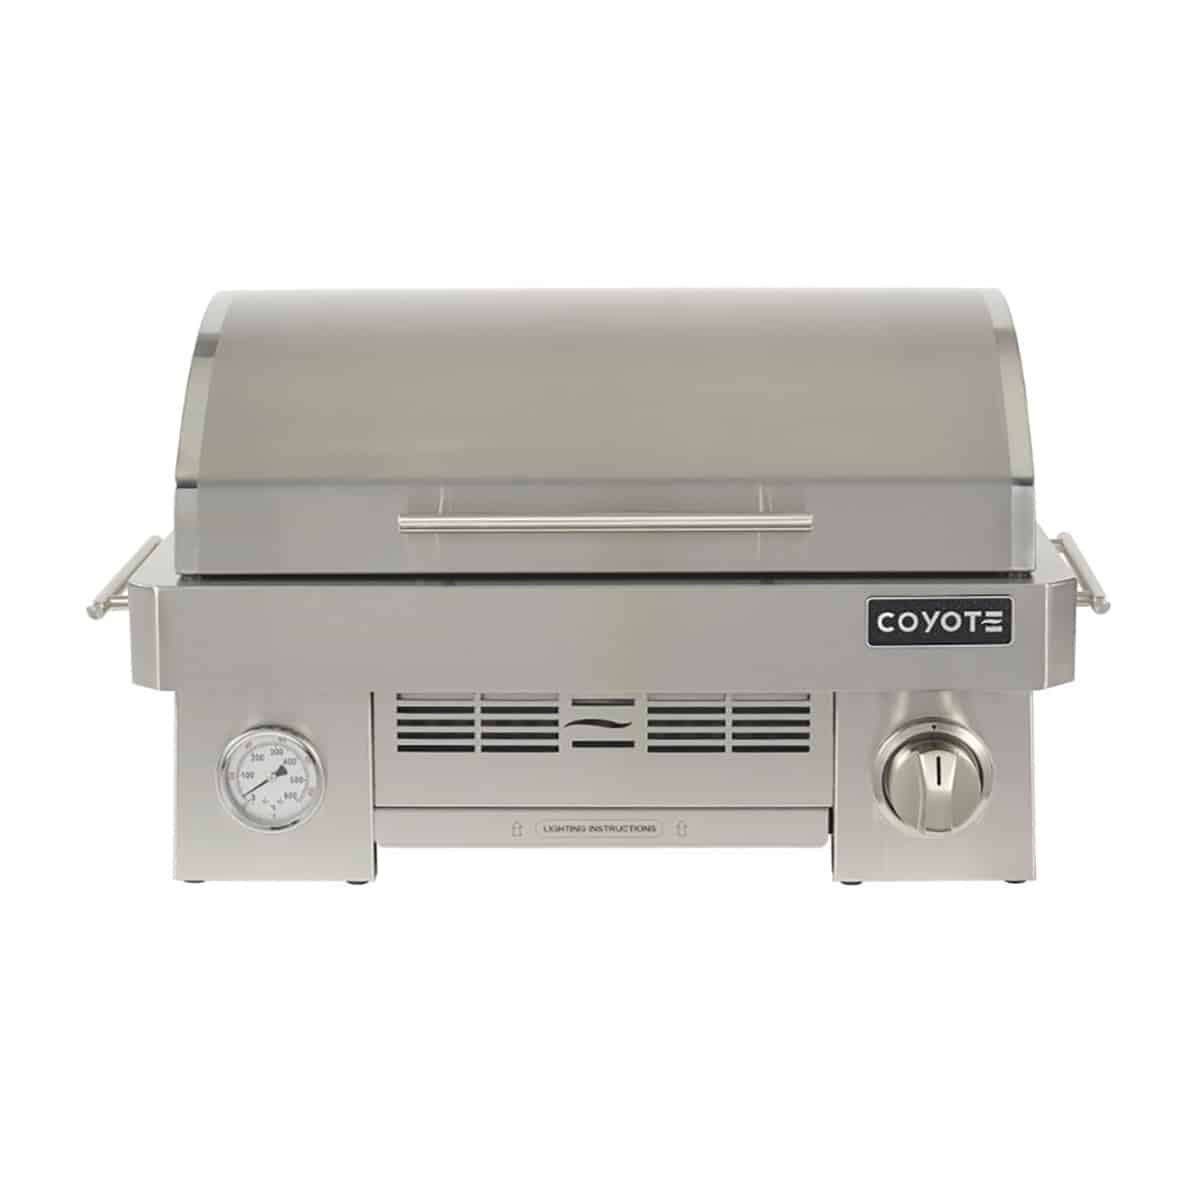 Coyote Propane Portable Grill With Infinity burner up to 20,000 btu Front View Hood Cover Closed